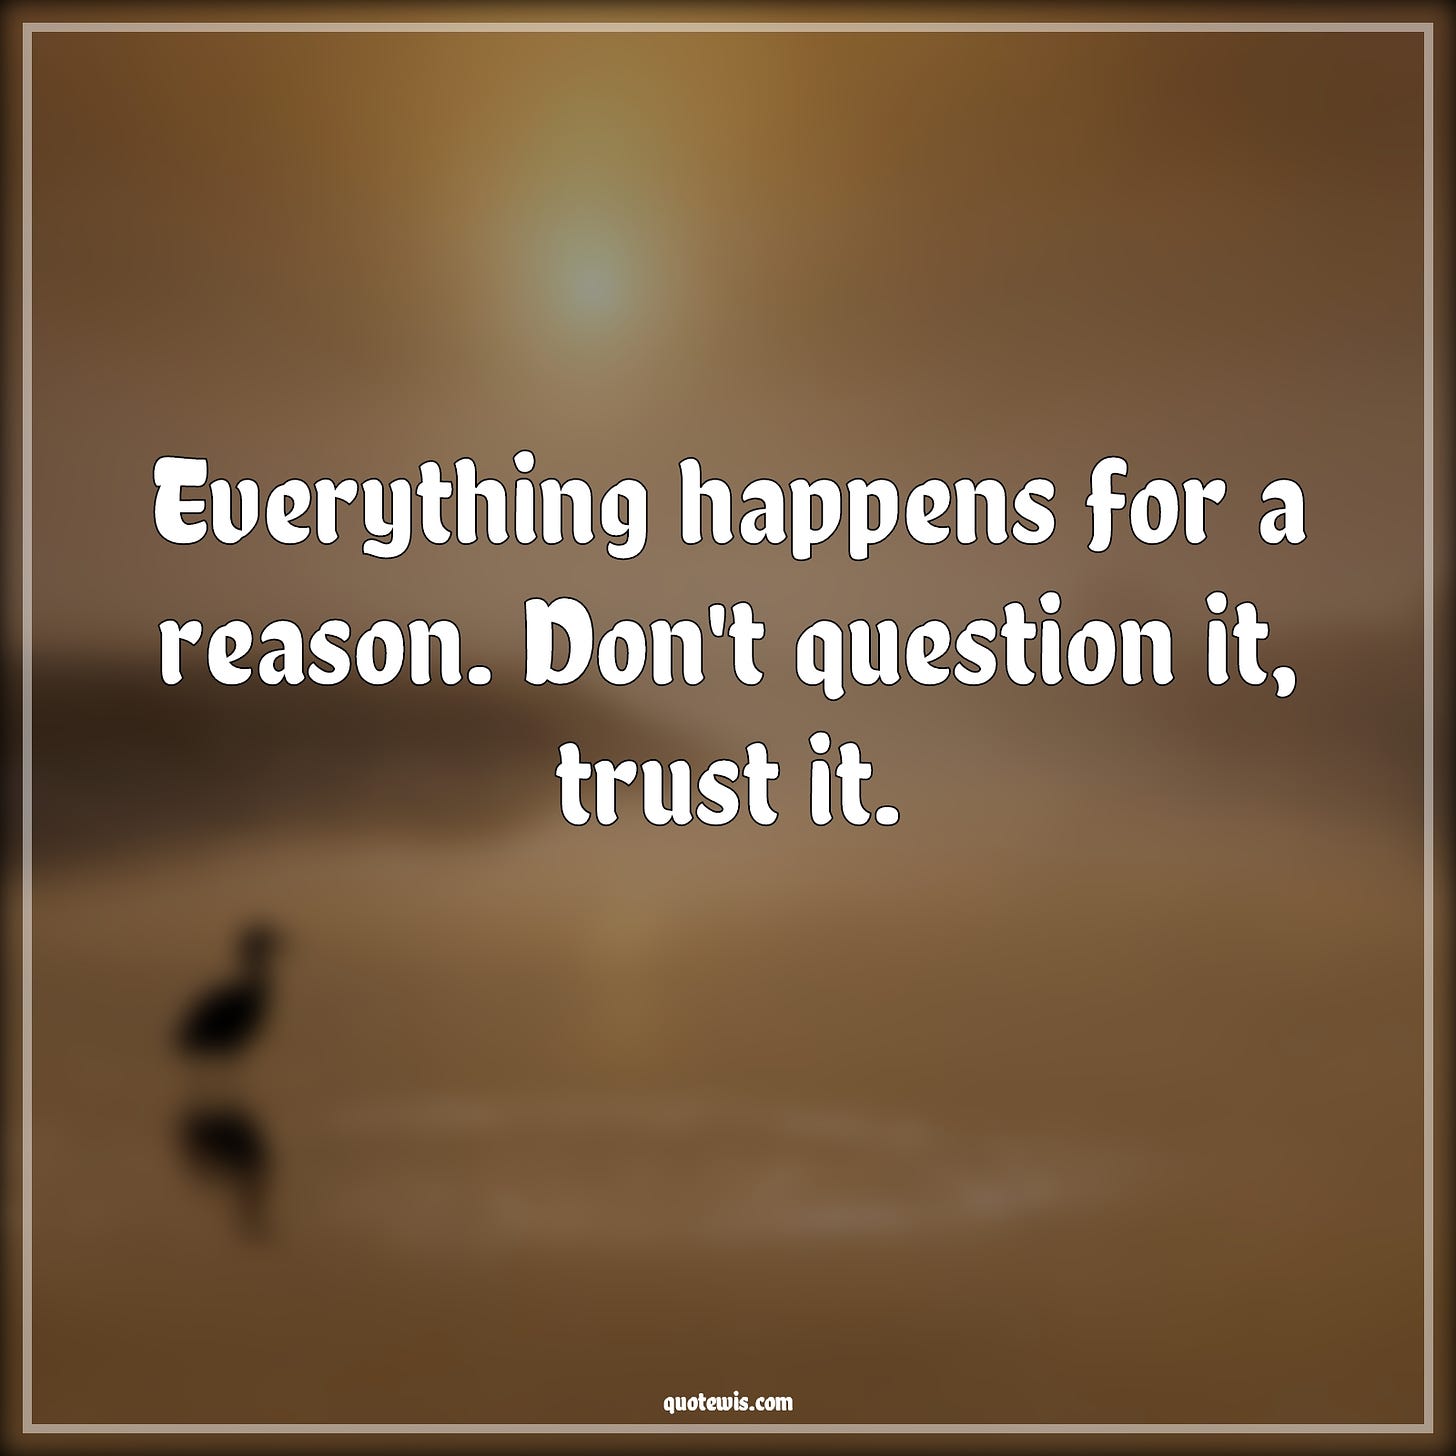 Everything happens for a reason. Don't question it, trust it. - quotewis.com